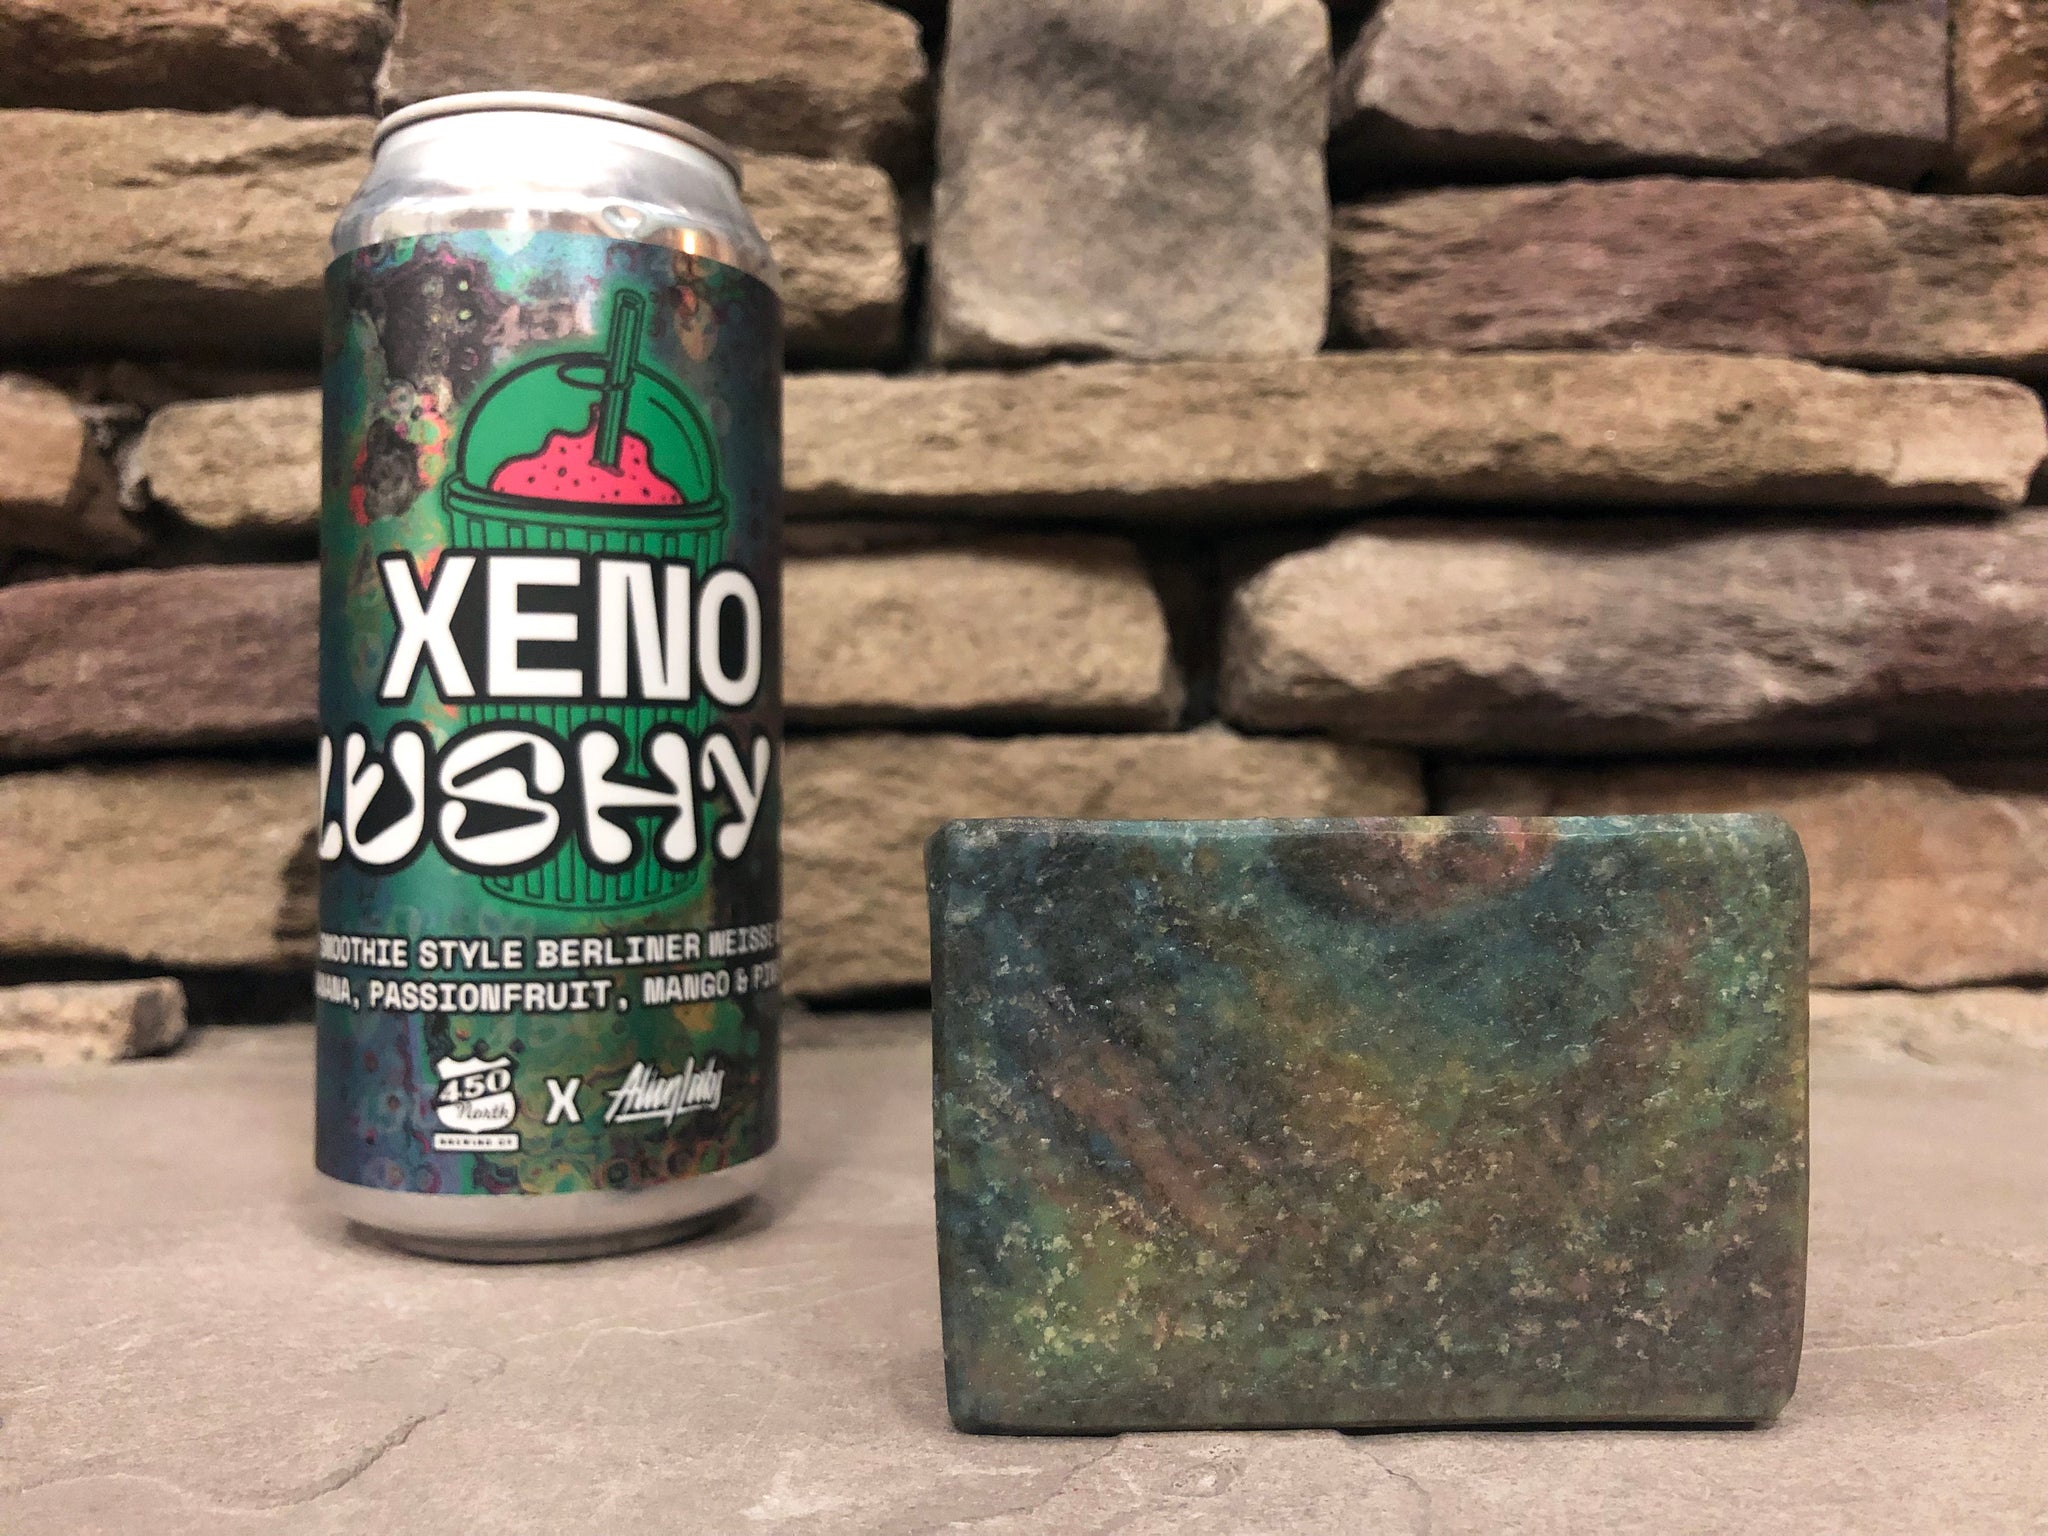 xeno slushy beer soap made with xeno slushy xl beer from 450 north brewing company in collaboration with AlienLabs craft beer soap with activated charcoal by spunkndisorderly 